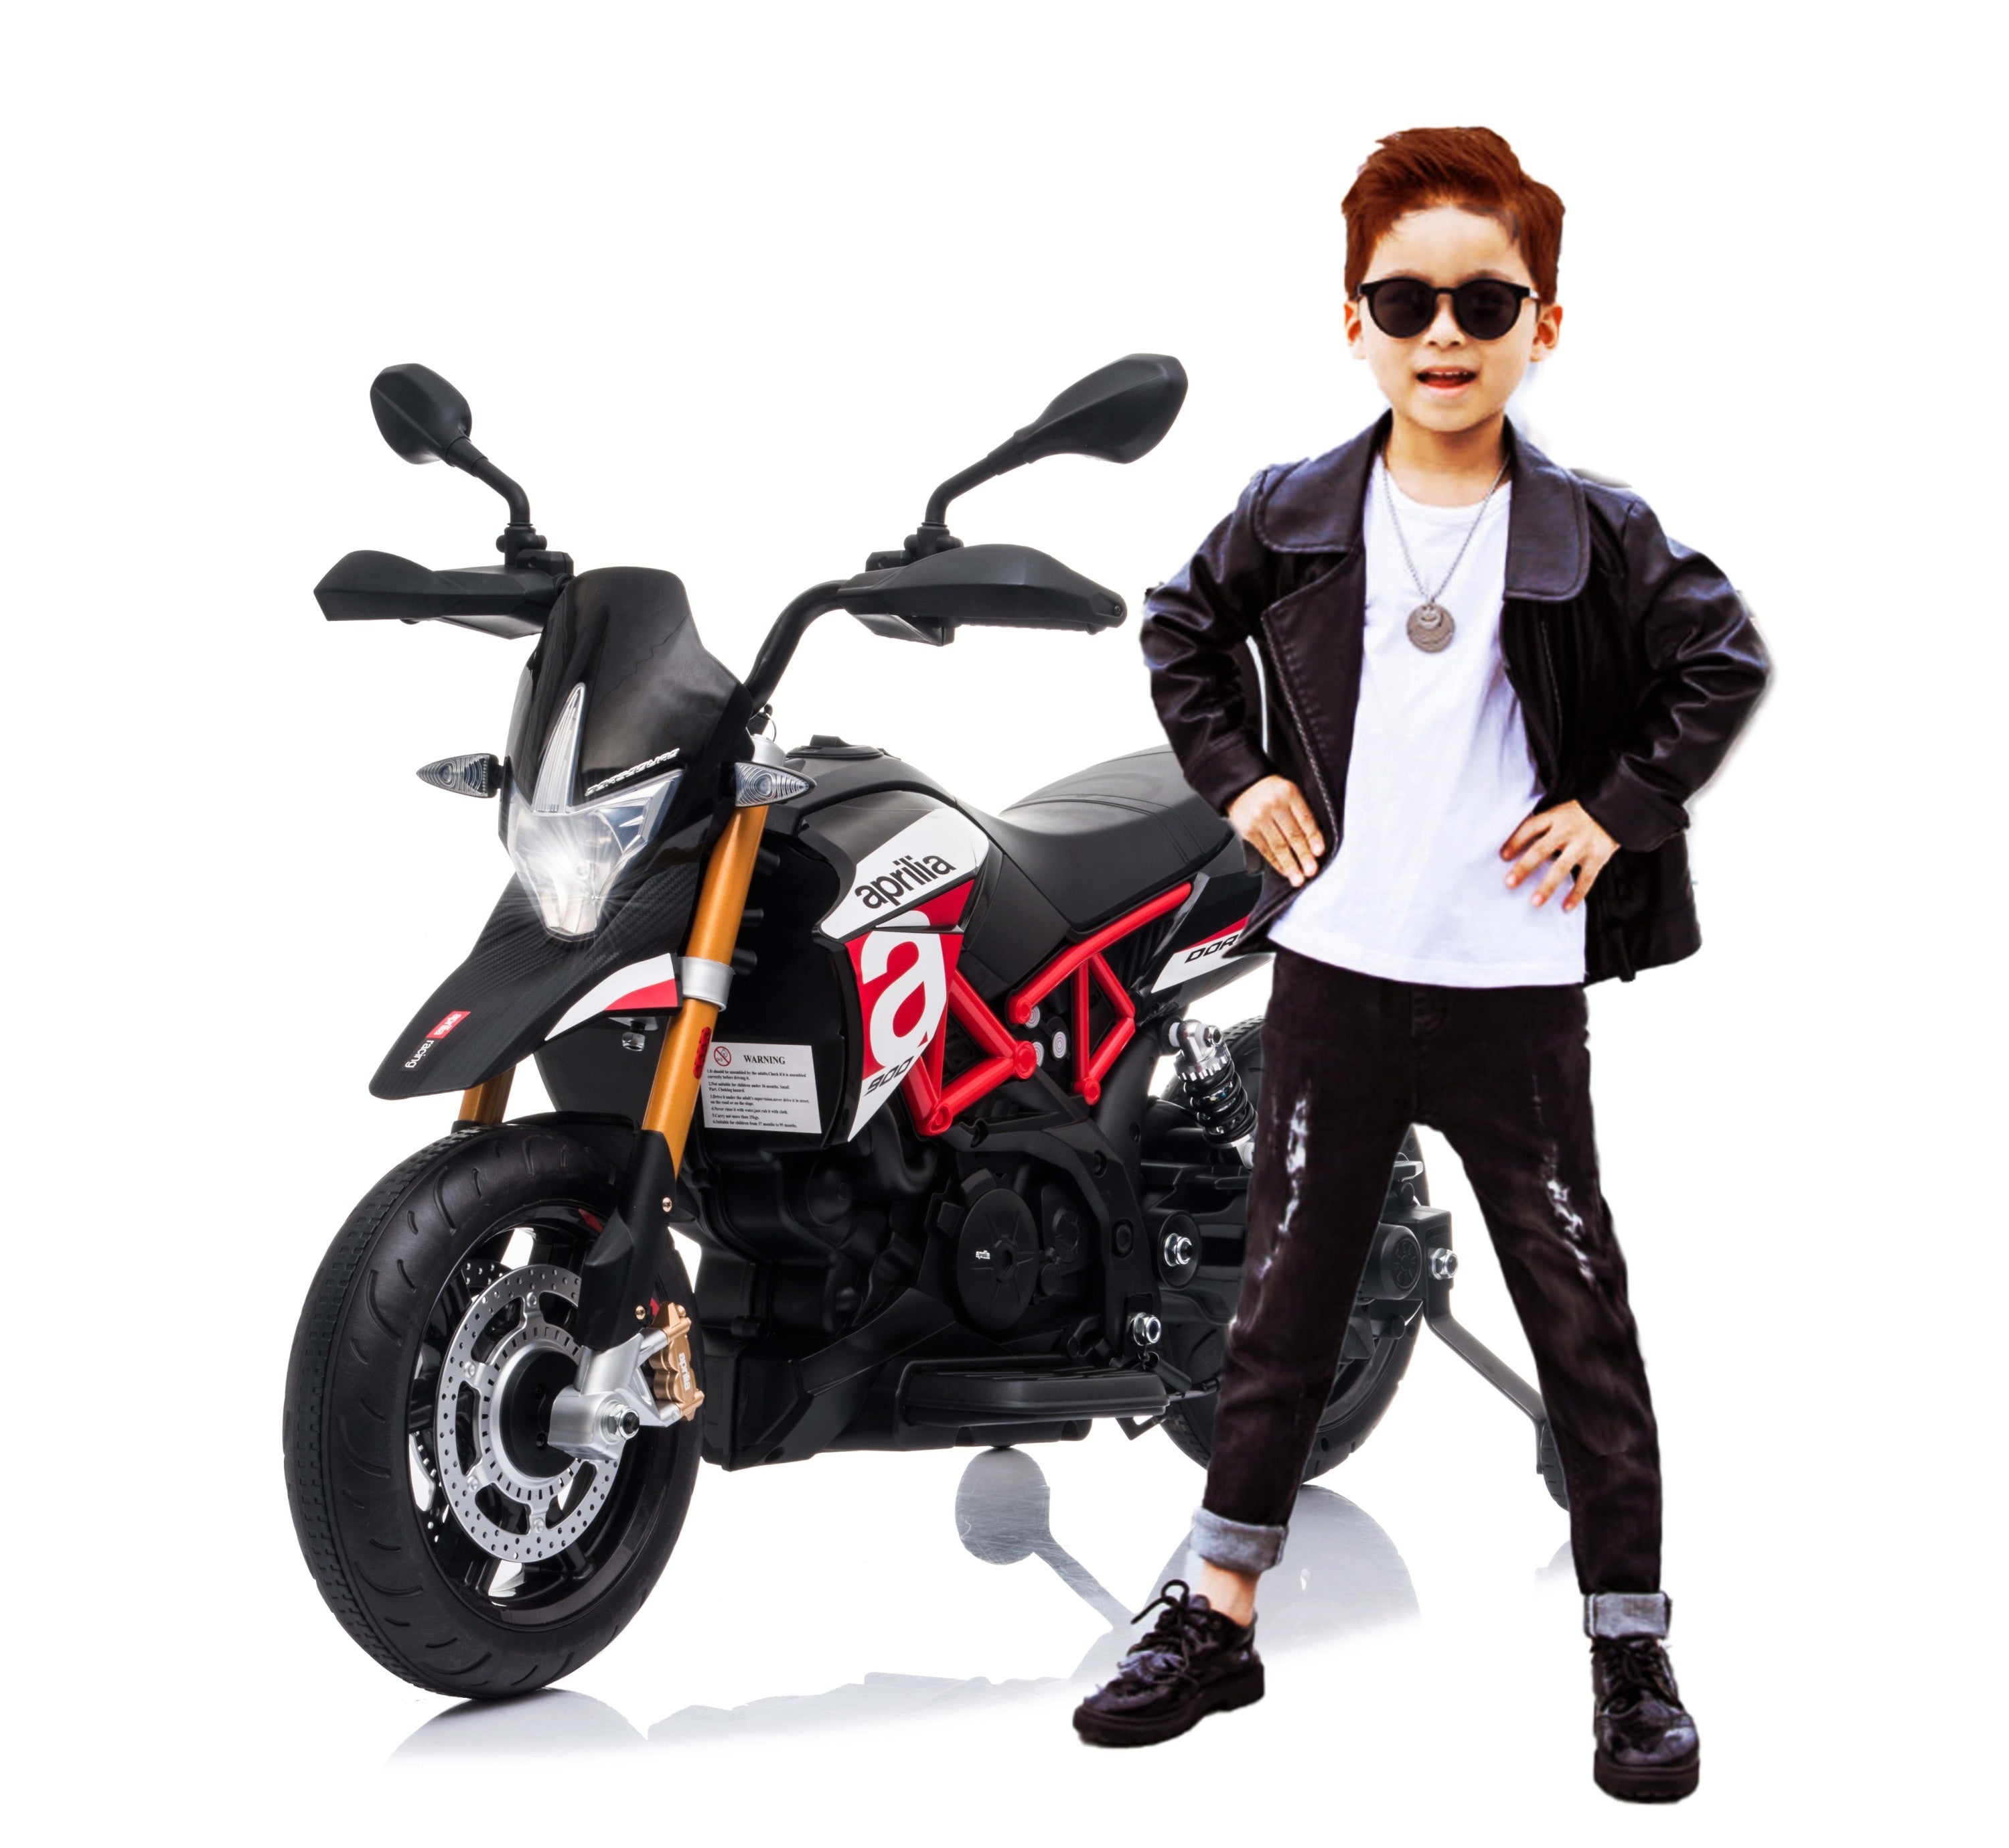 🆓🚛 Red, Licensed Aprilia Electric Motorcycle, 12V Kids Motorcycle, Ride On Toy W/Training Wheels, Spring Suspension, Led Lights, Sounds & Music, Mp3, Battery Powered Dirt Bike for Boys & Girls